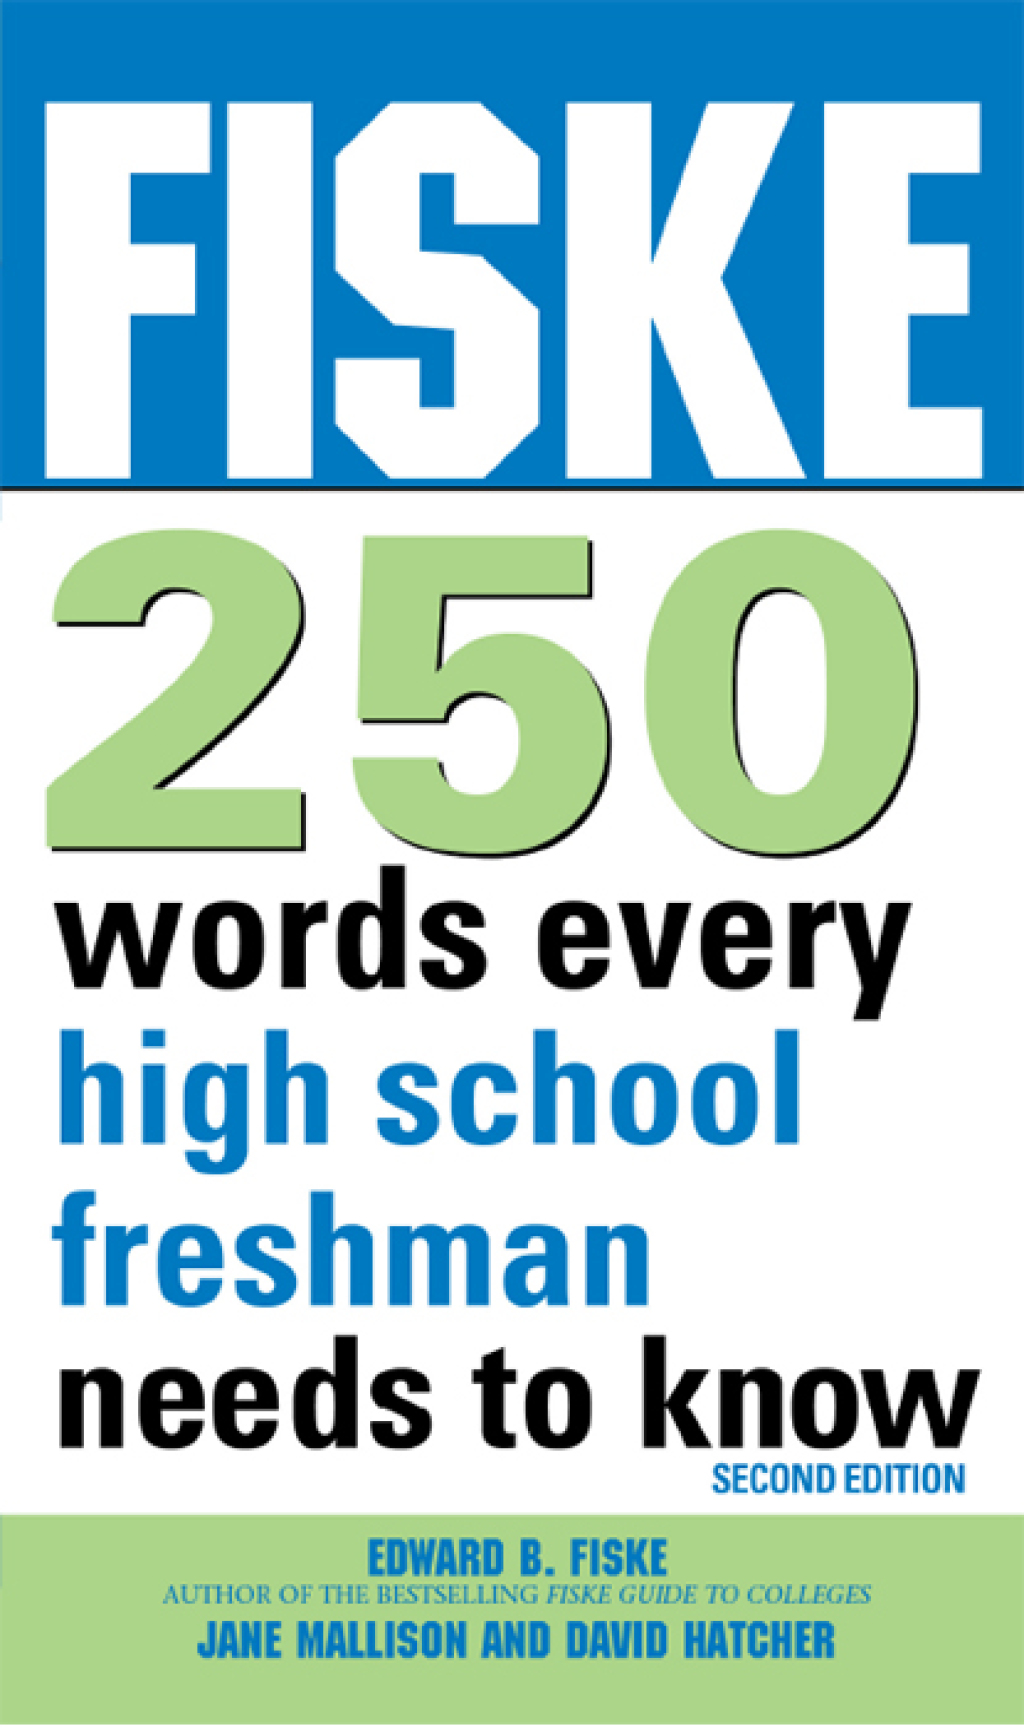 Fiske 250 Words Every High School Freshman Needs to Know - 2nd Edition (eBook)